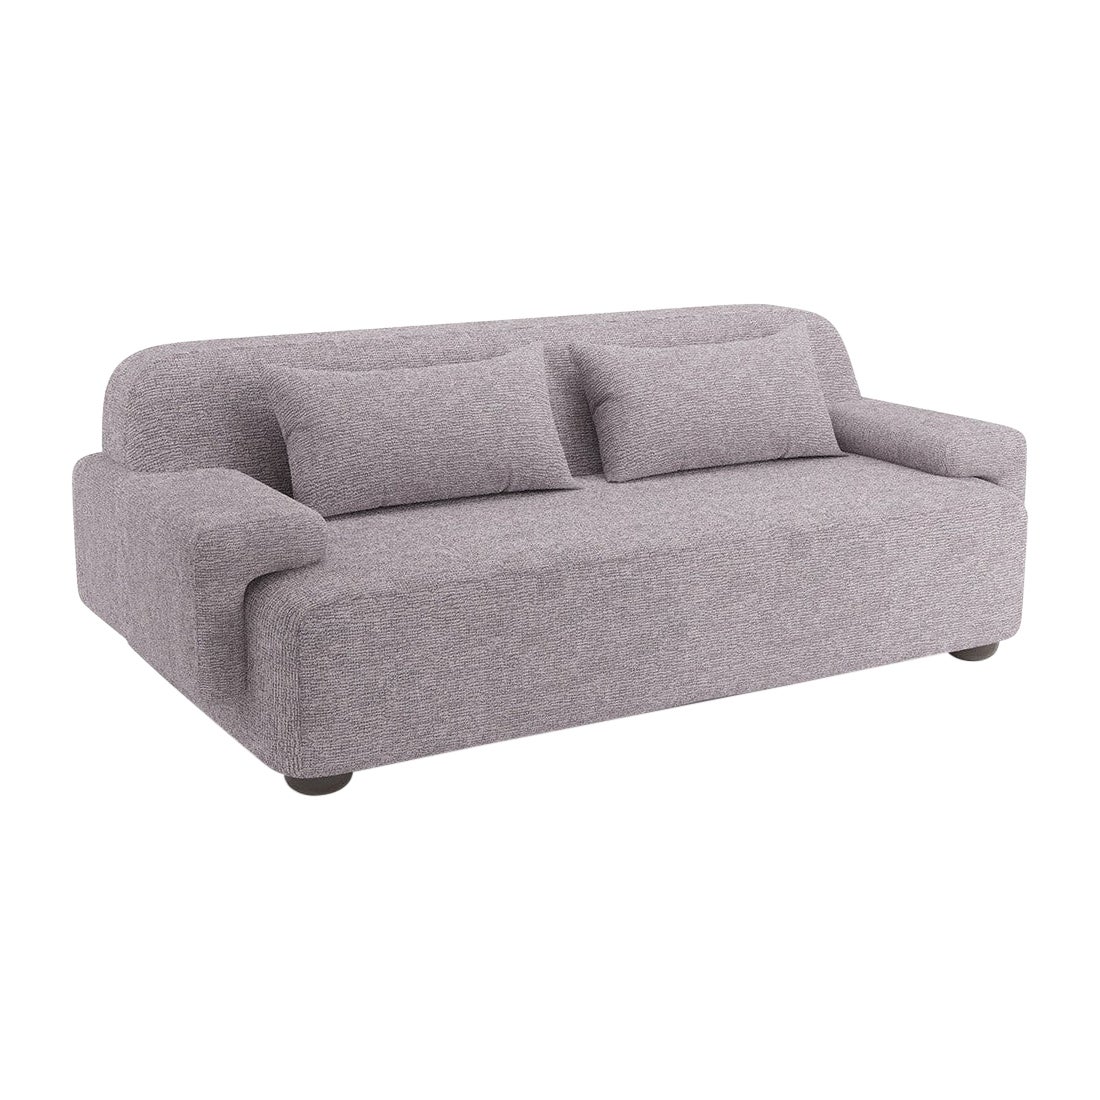 Popus Editions Lena 3 Seater Sofa in Mouse Megeve Fabric with Knit Effect